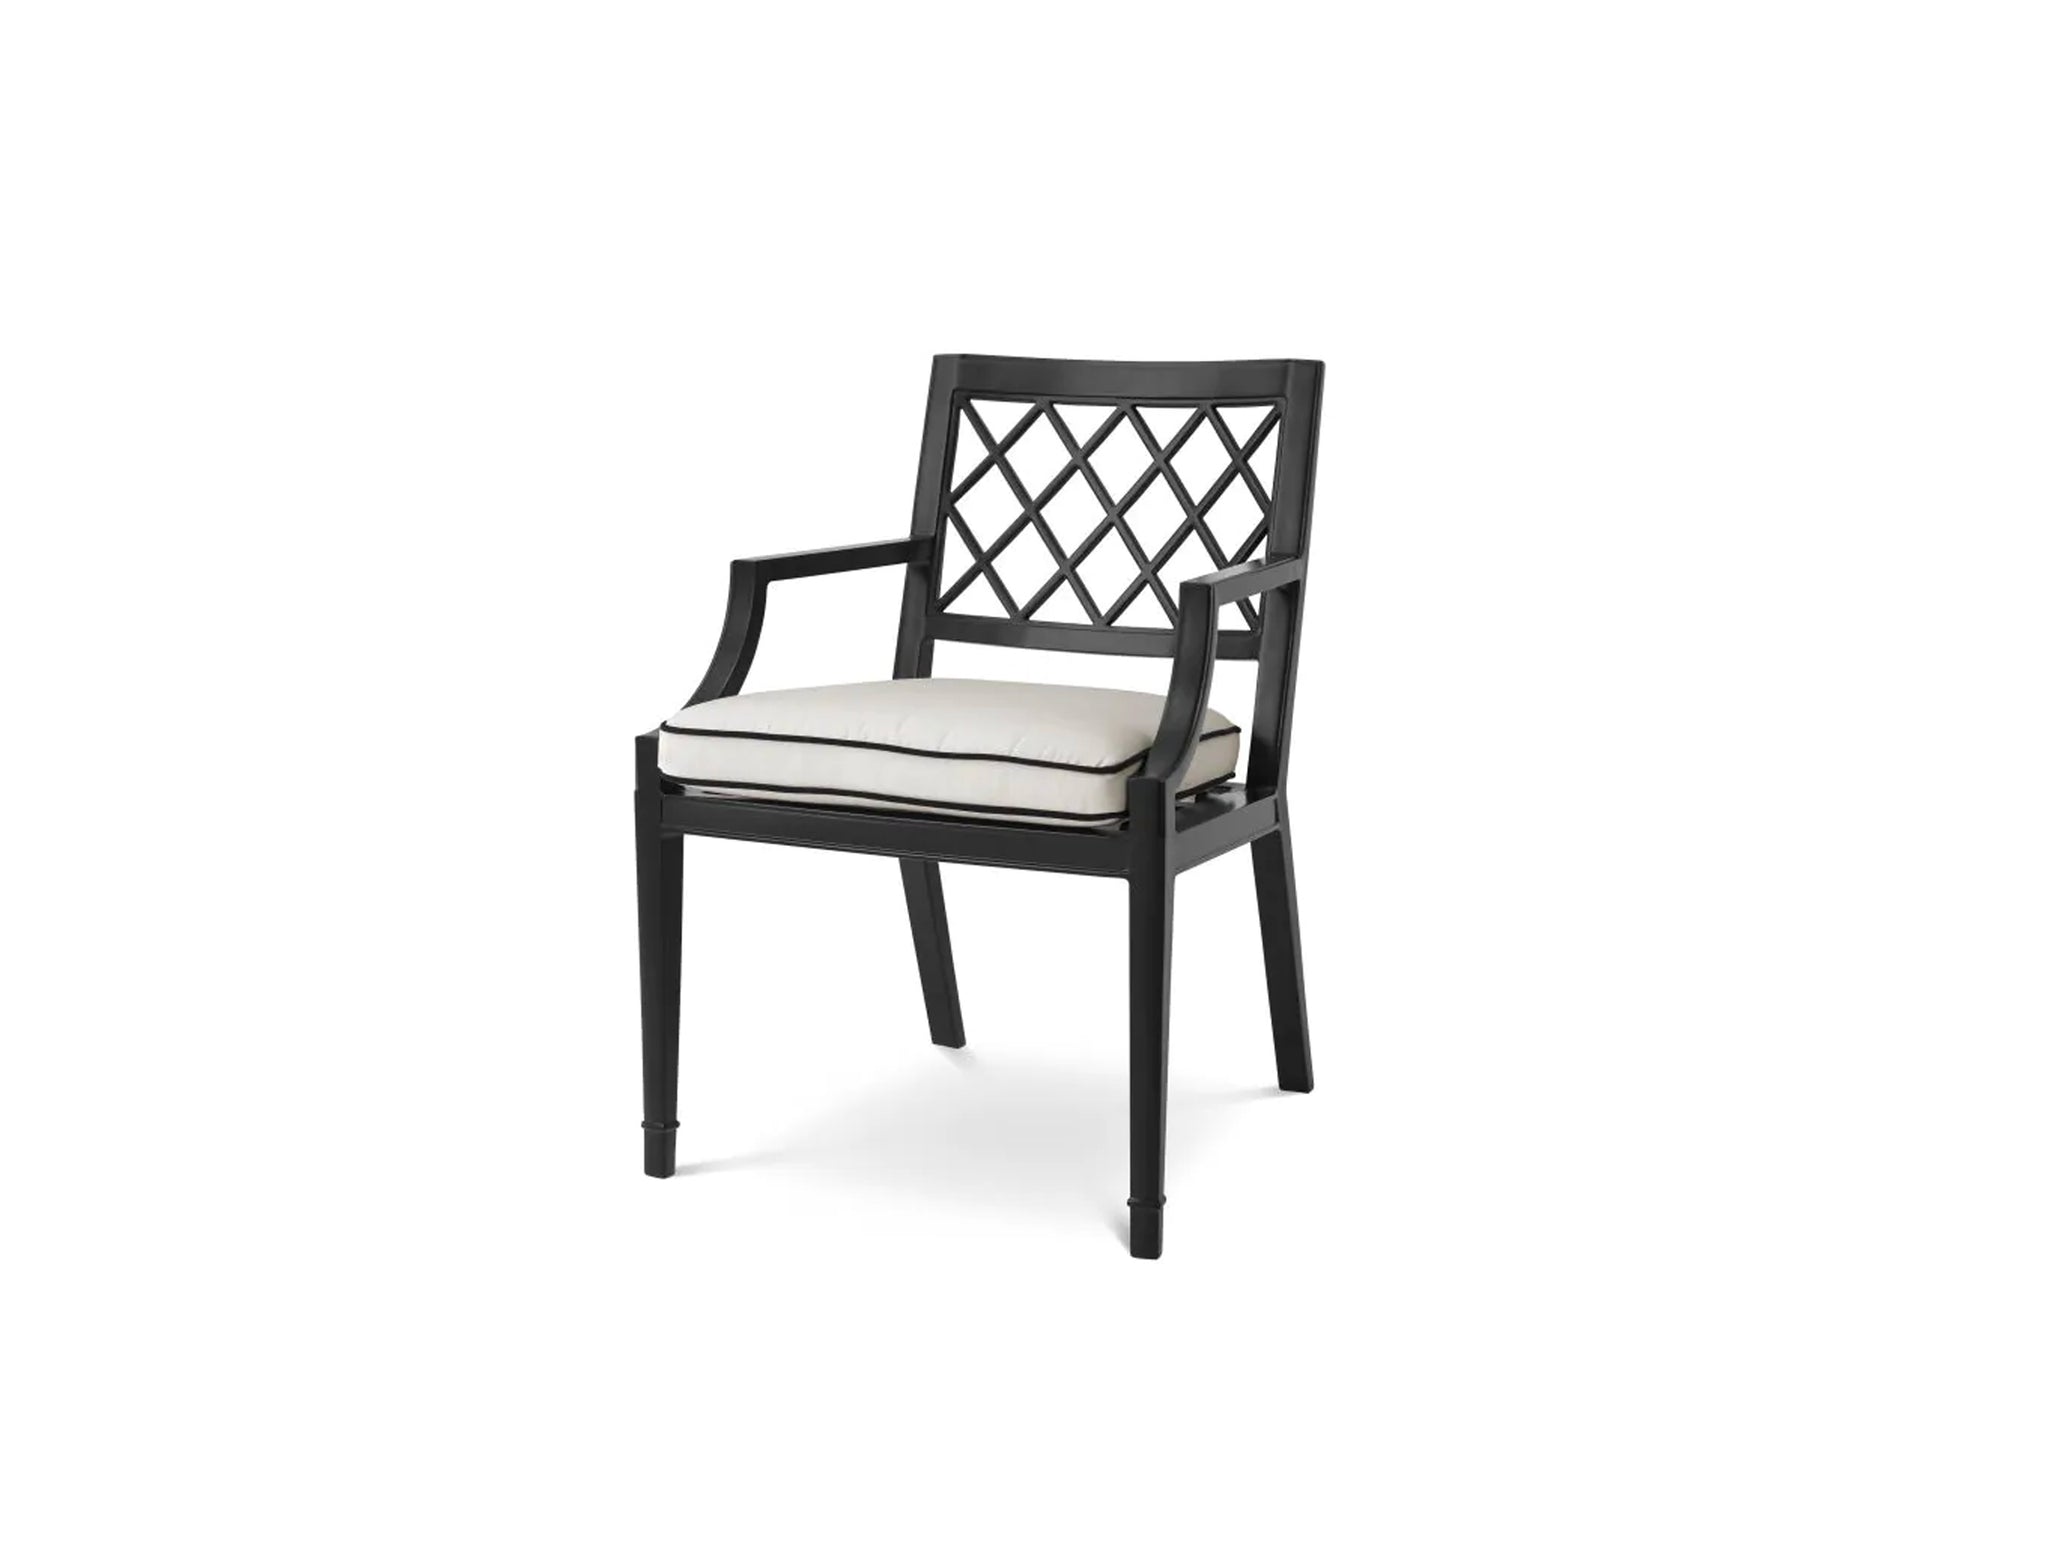 Bell Rive Outdoor Dining Chair With Arm